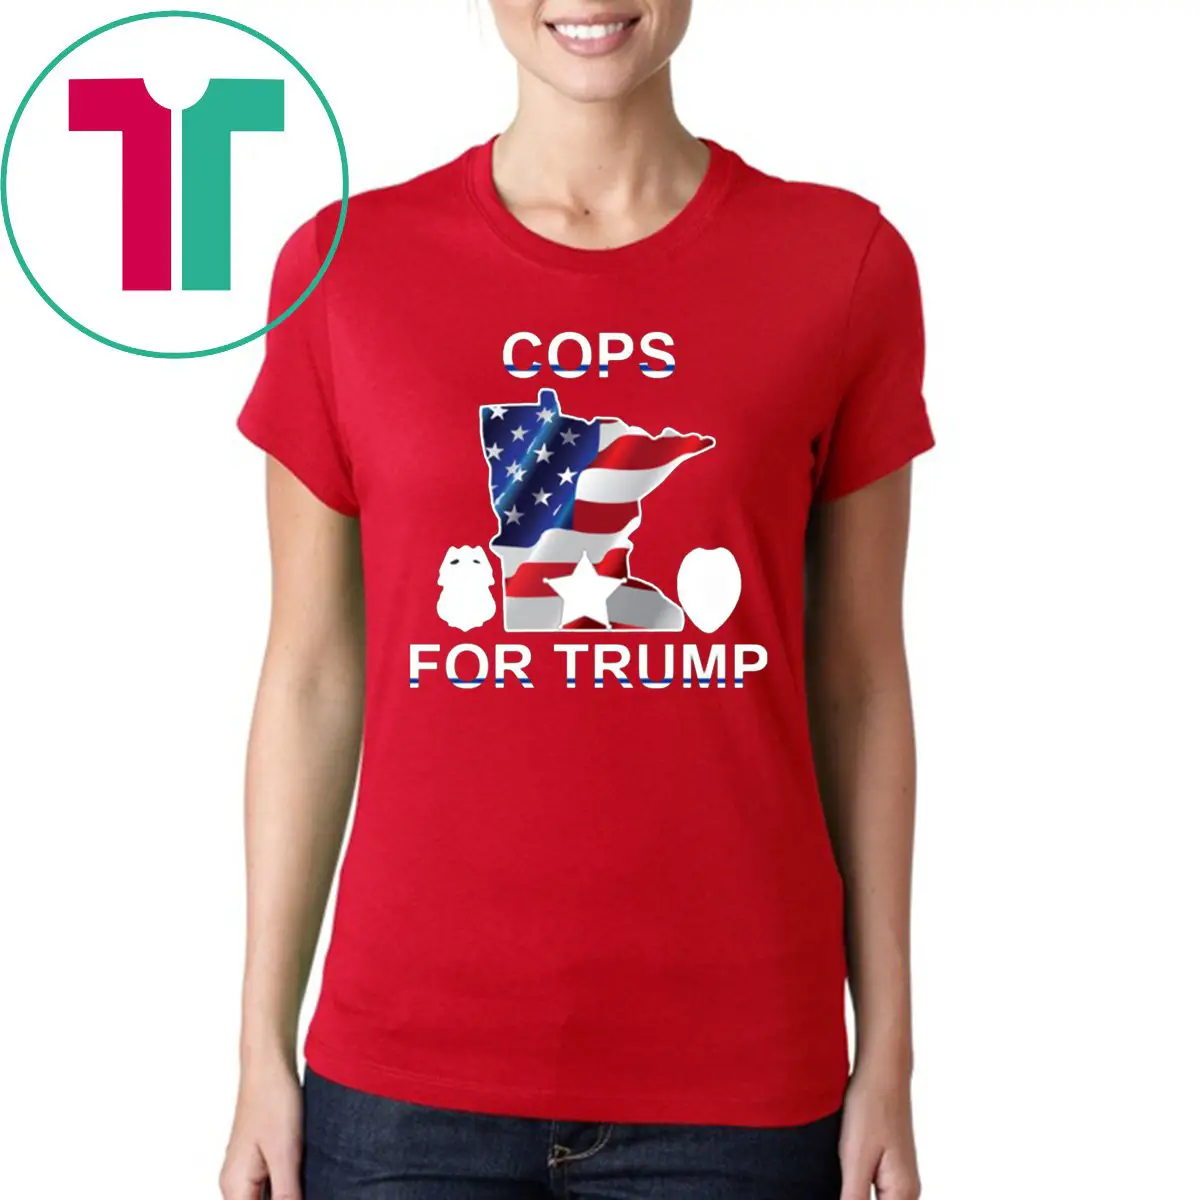 How Can I Buy Cops For Trump Classic T